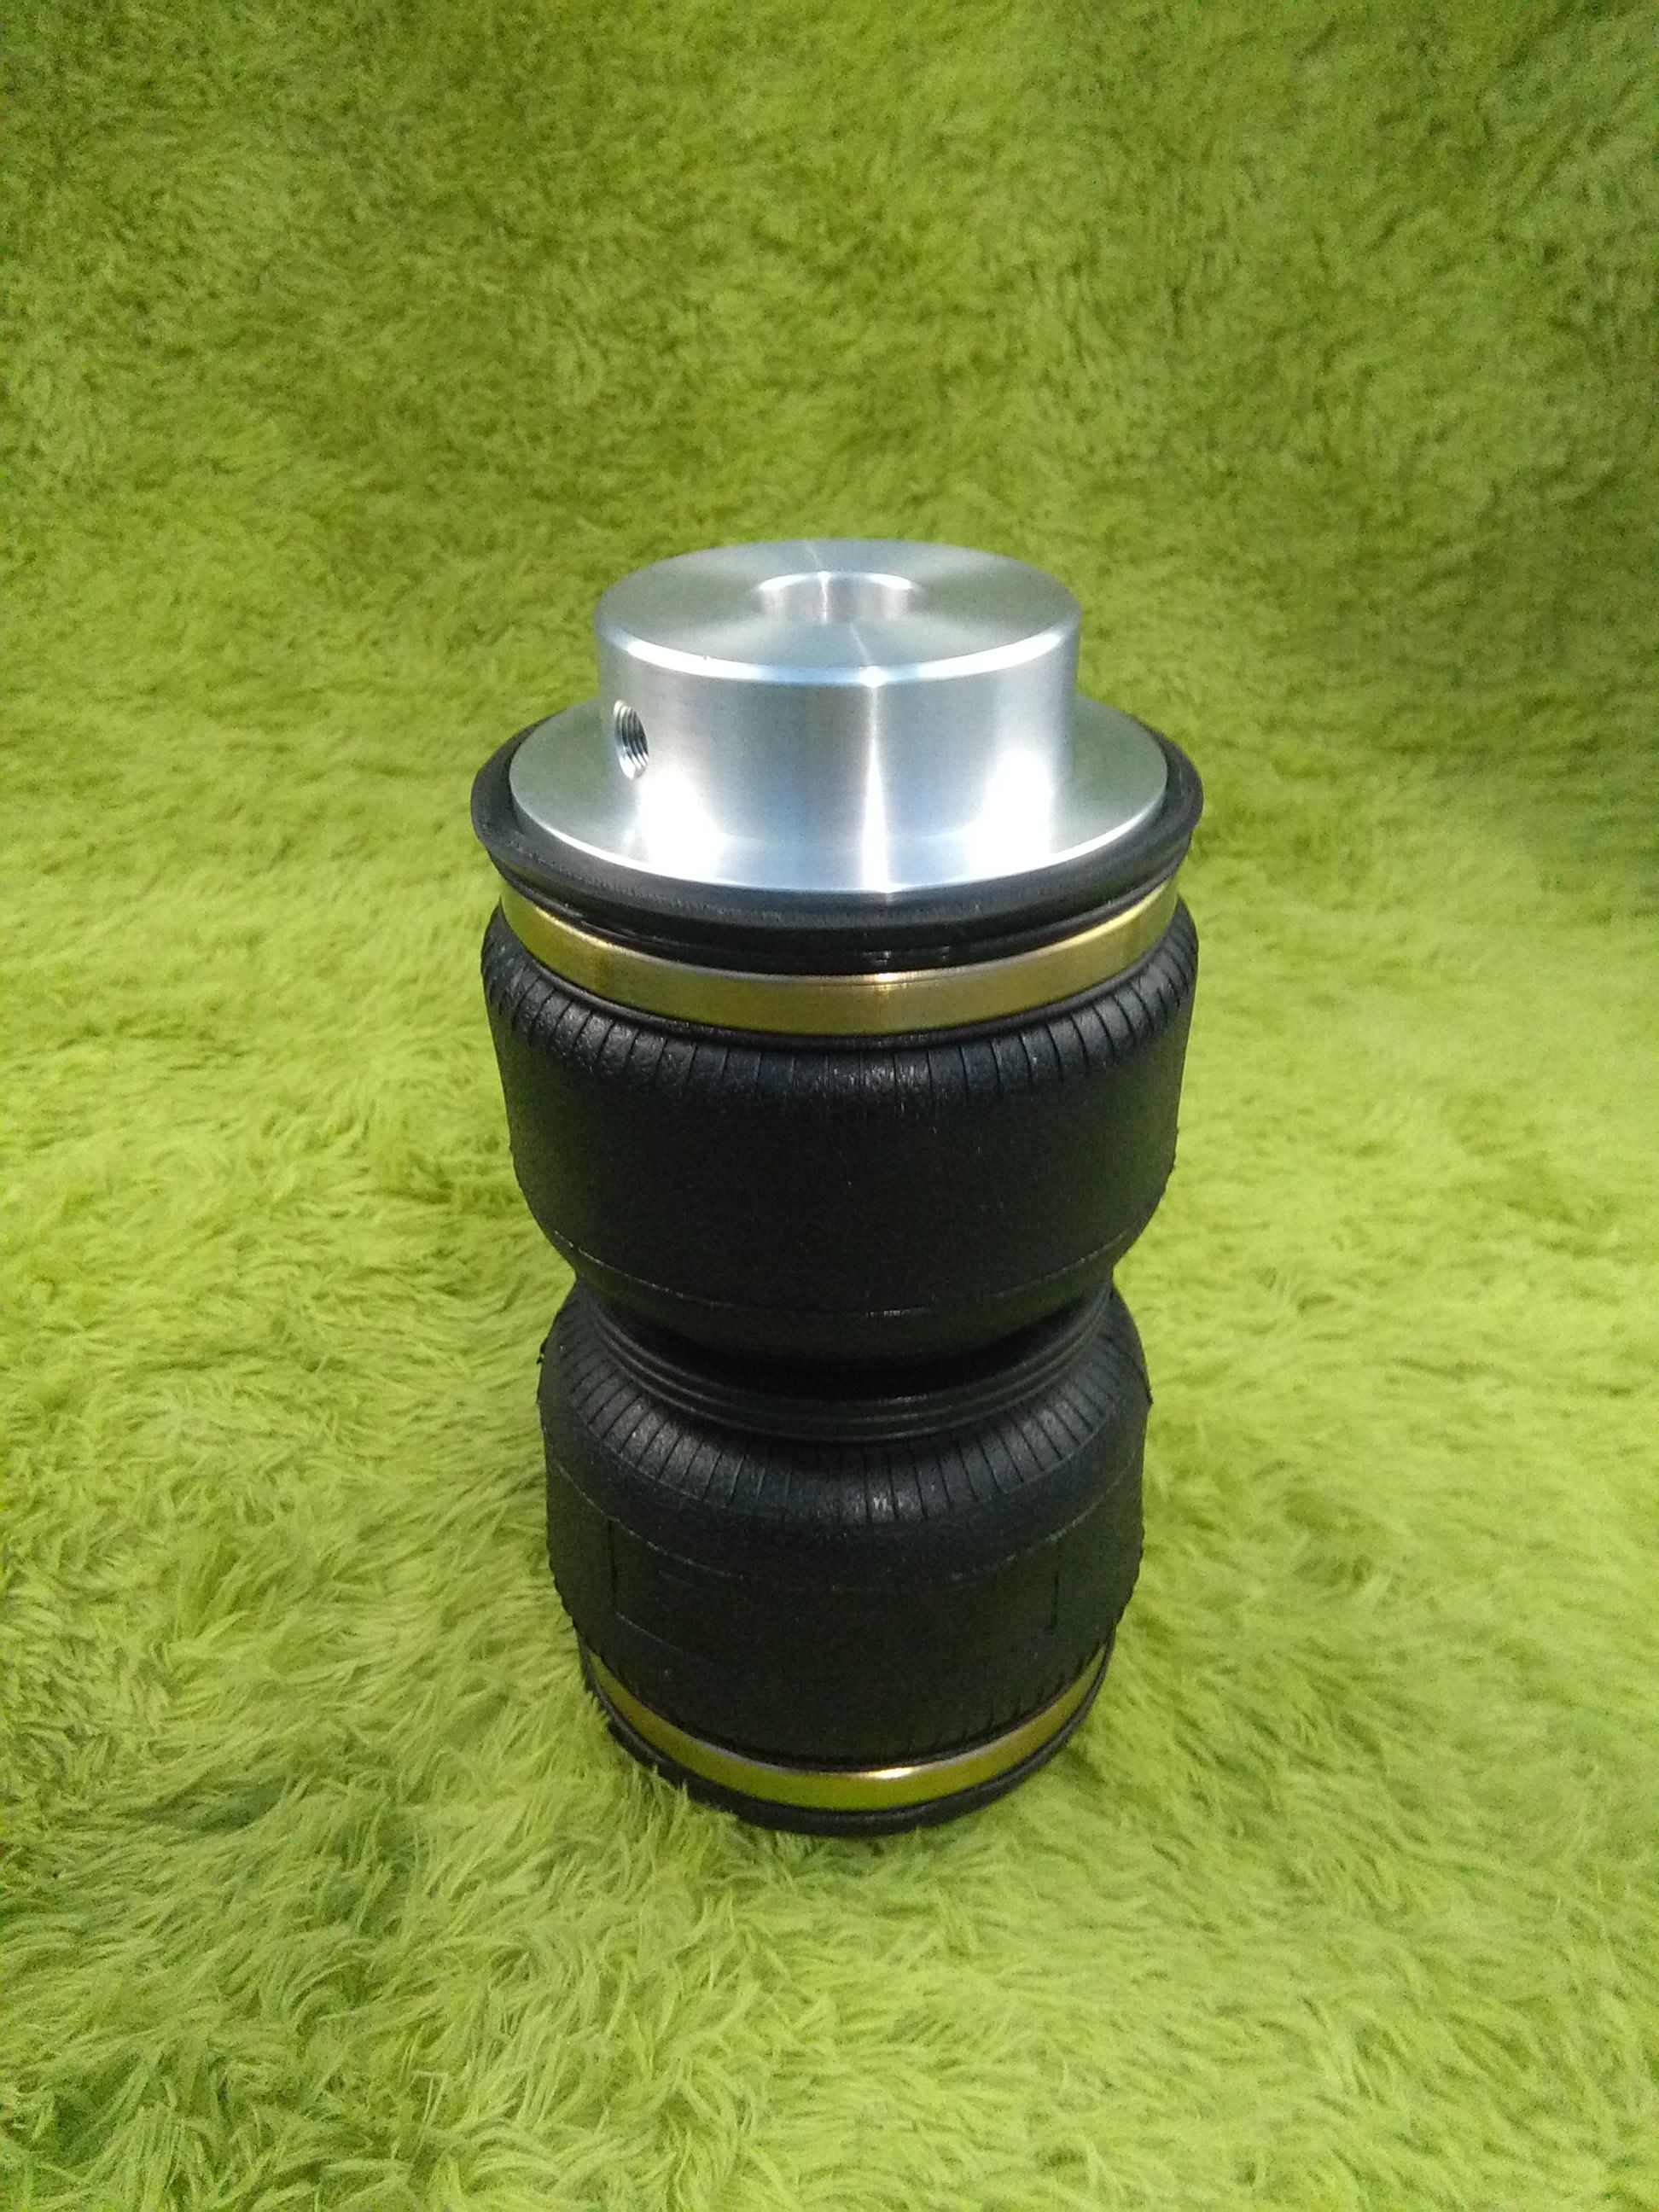 2021 2018 Special Offer Air Spring Rubber Tiida Pcbr New